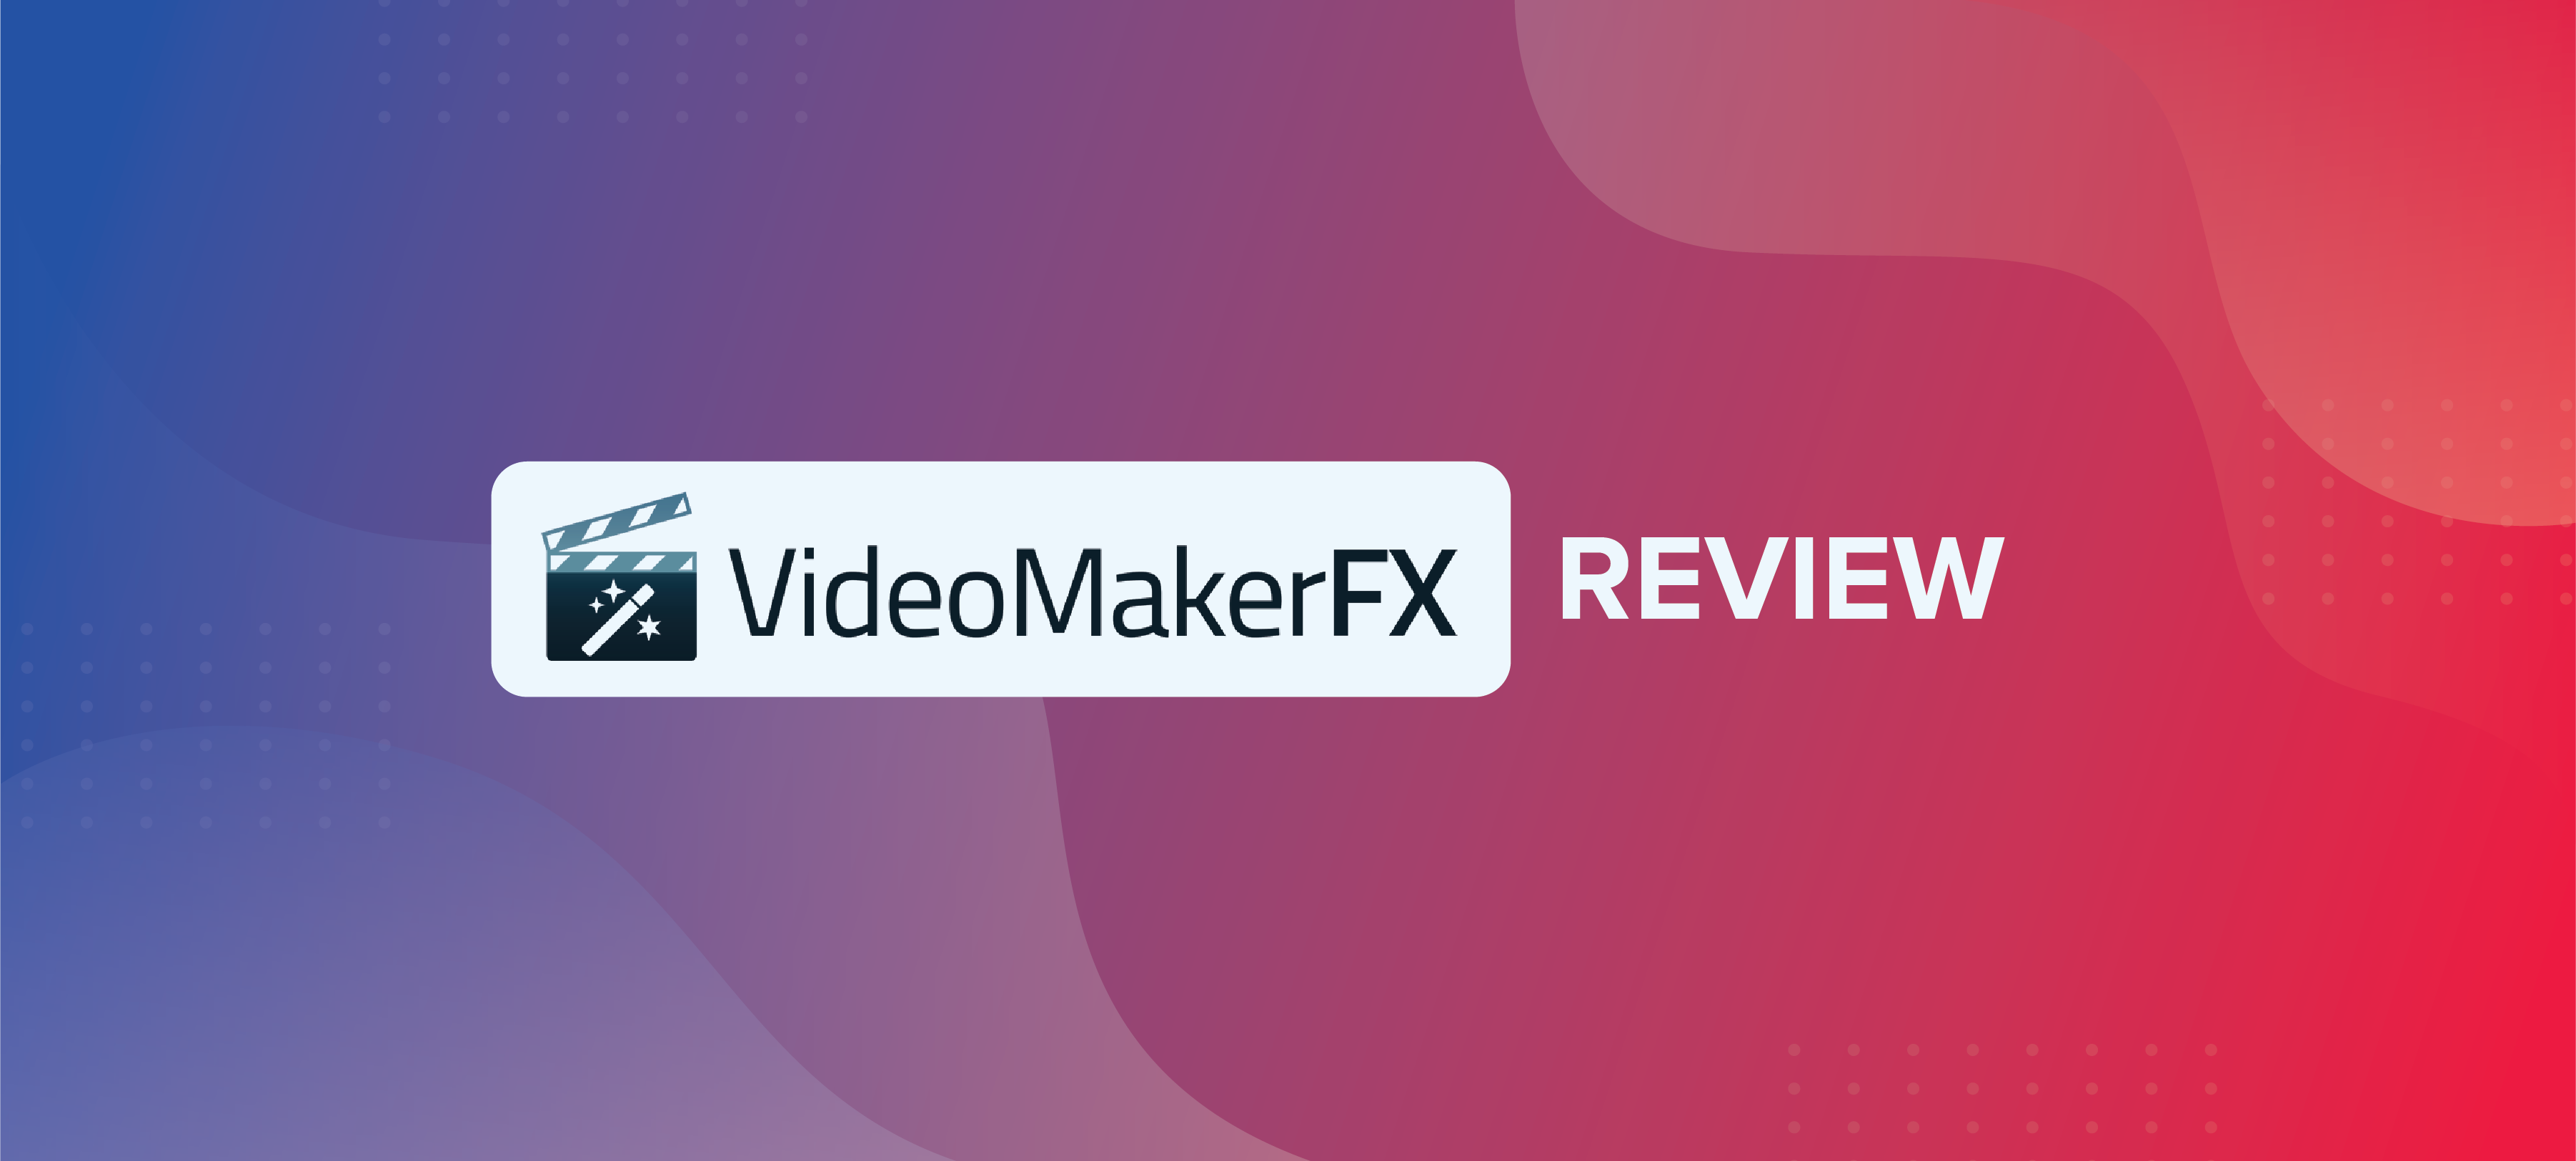 VideoMakerFX Review: How Much Can It Do?